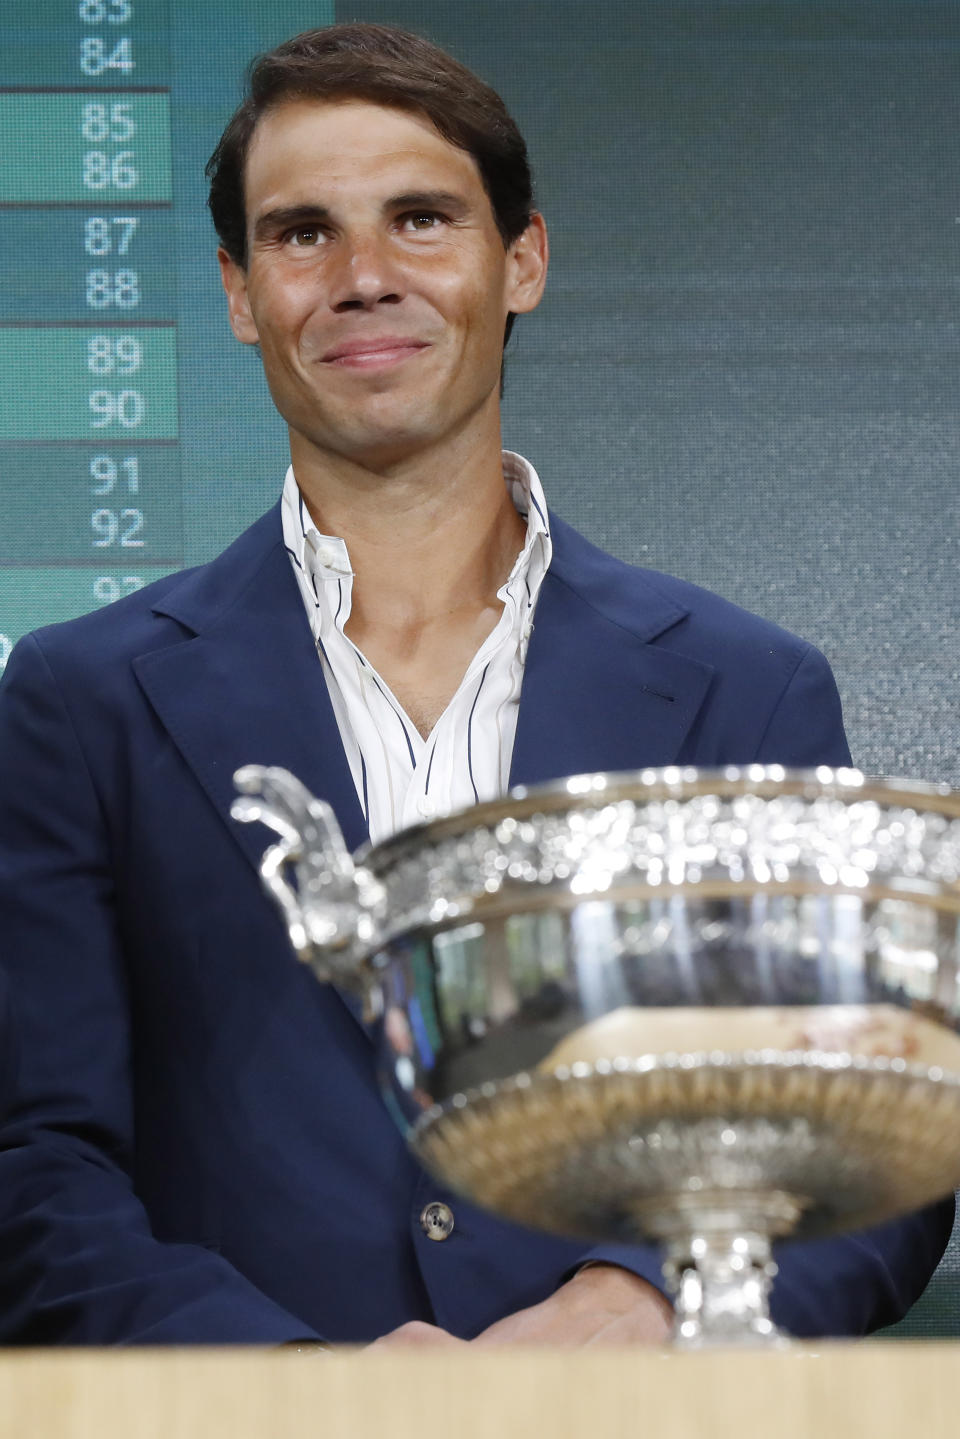 Defending champion Spain's Rafael Nadal poses next to the cup during the draw of the French Open tennis tournament at the Roland Garros stadium in Paris, Thursday, May 23, 2019. The French Open tennis tournament starts Sunday May 26. (AP Photo/Michel Euler)